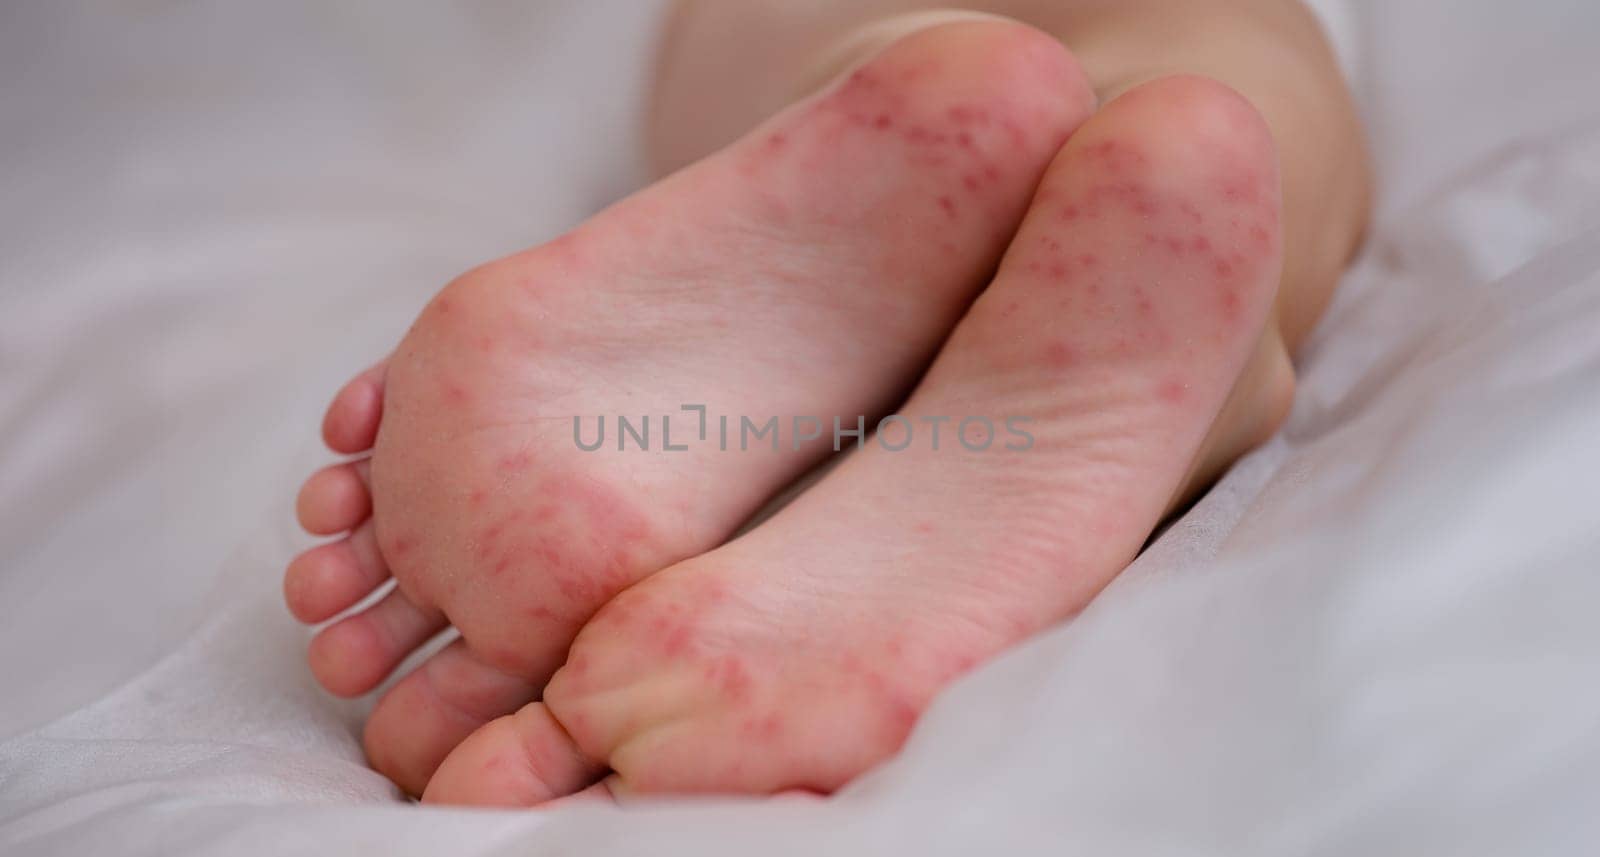 Painful rash red spots blisters on child leg by kuprevich